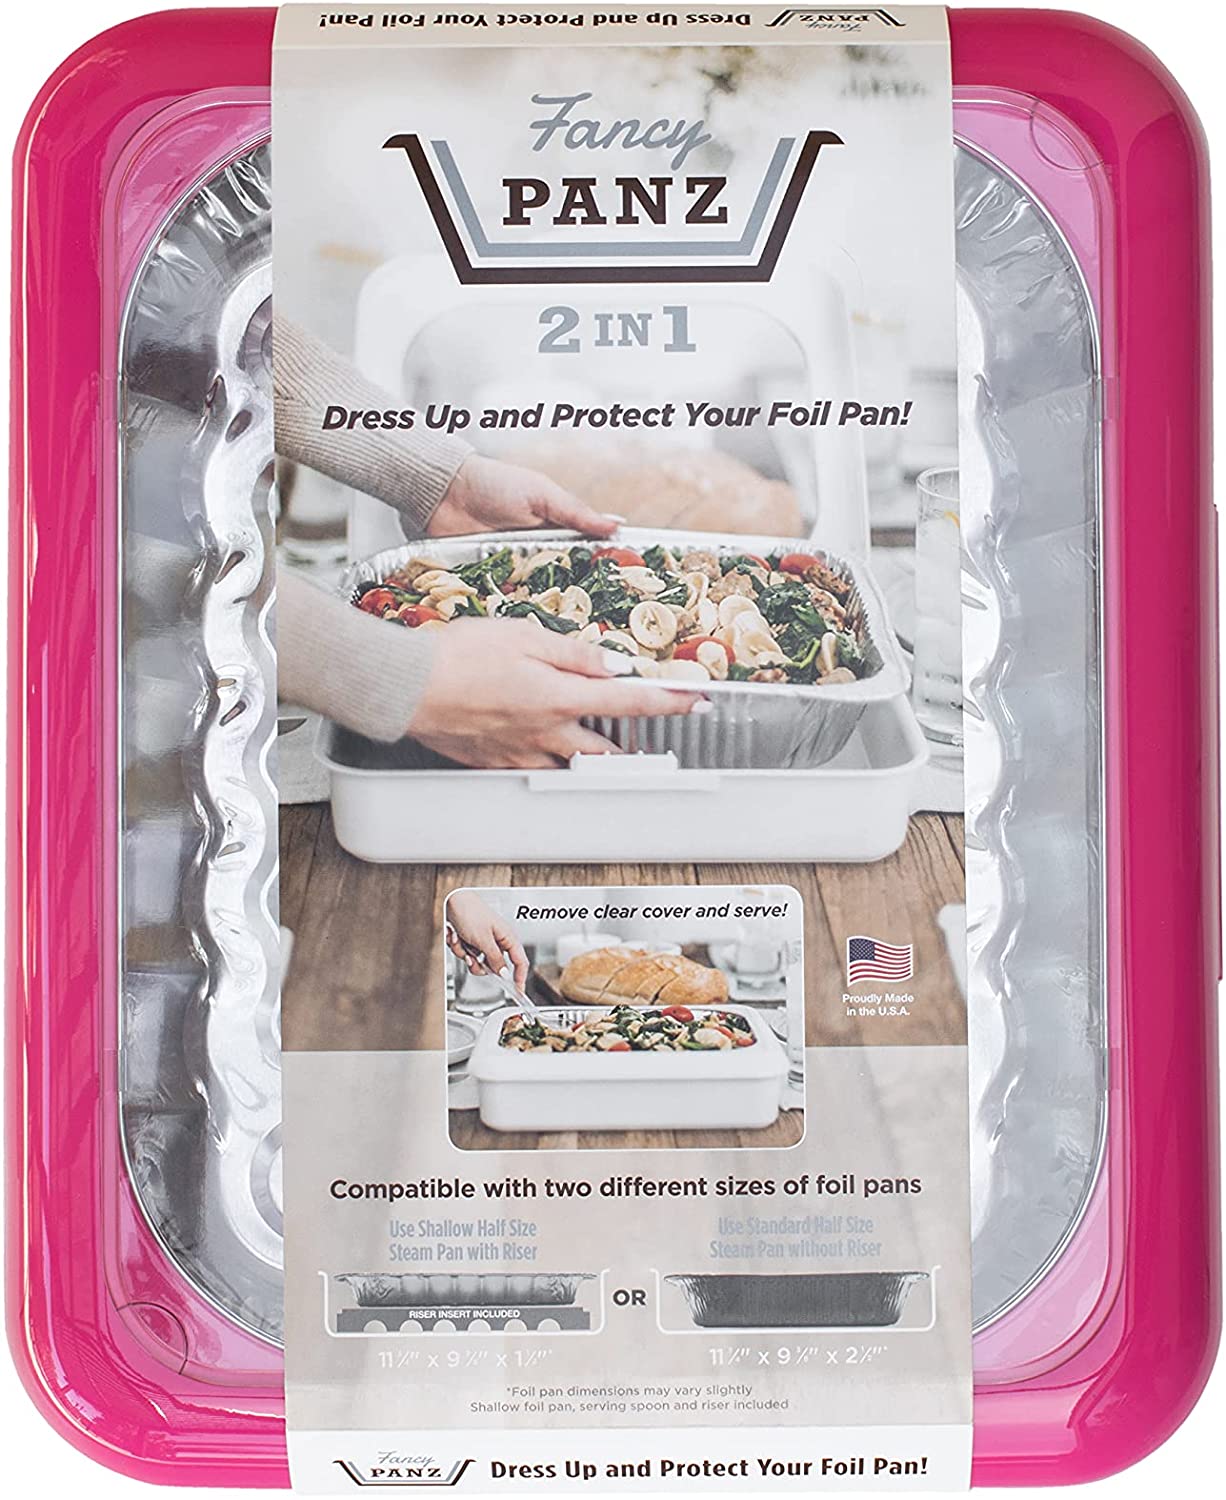 Fancy Panz 2 in 1 – Shop Holland House